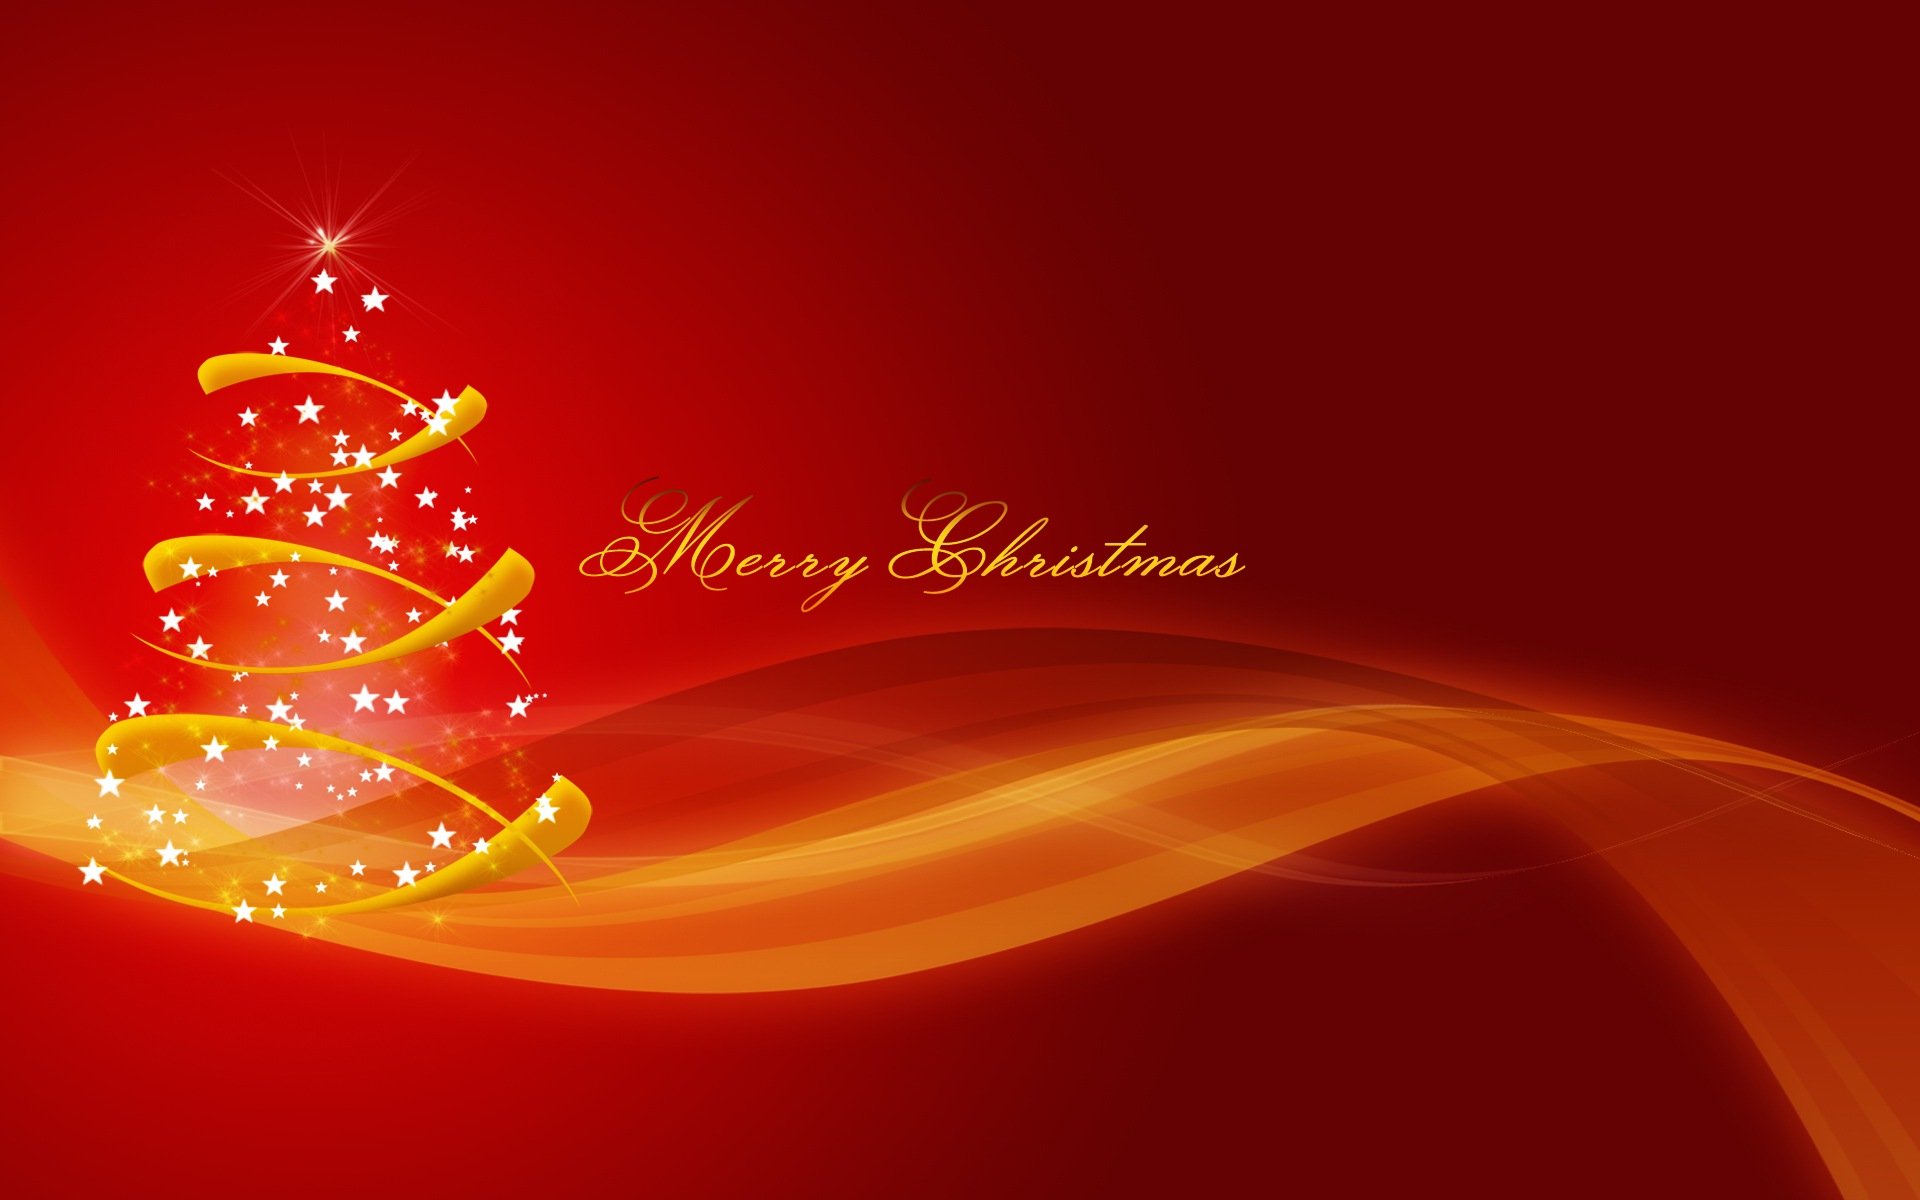 Merry Christmas Wallpapers Pictures Images 1920x1200